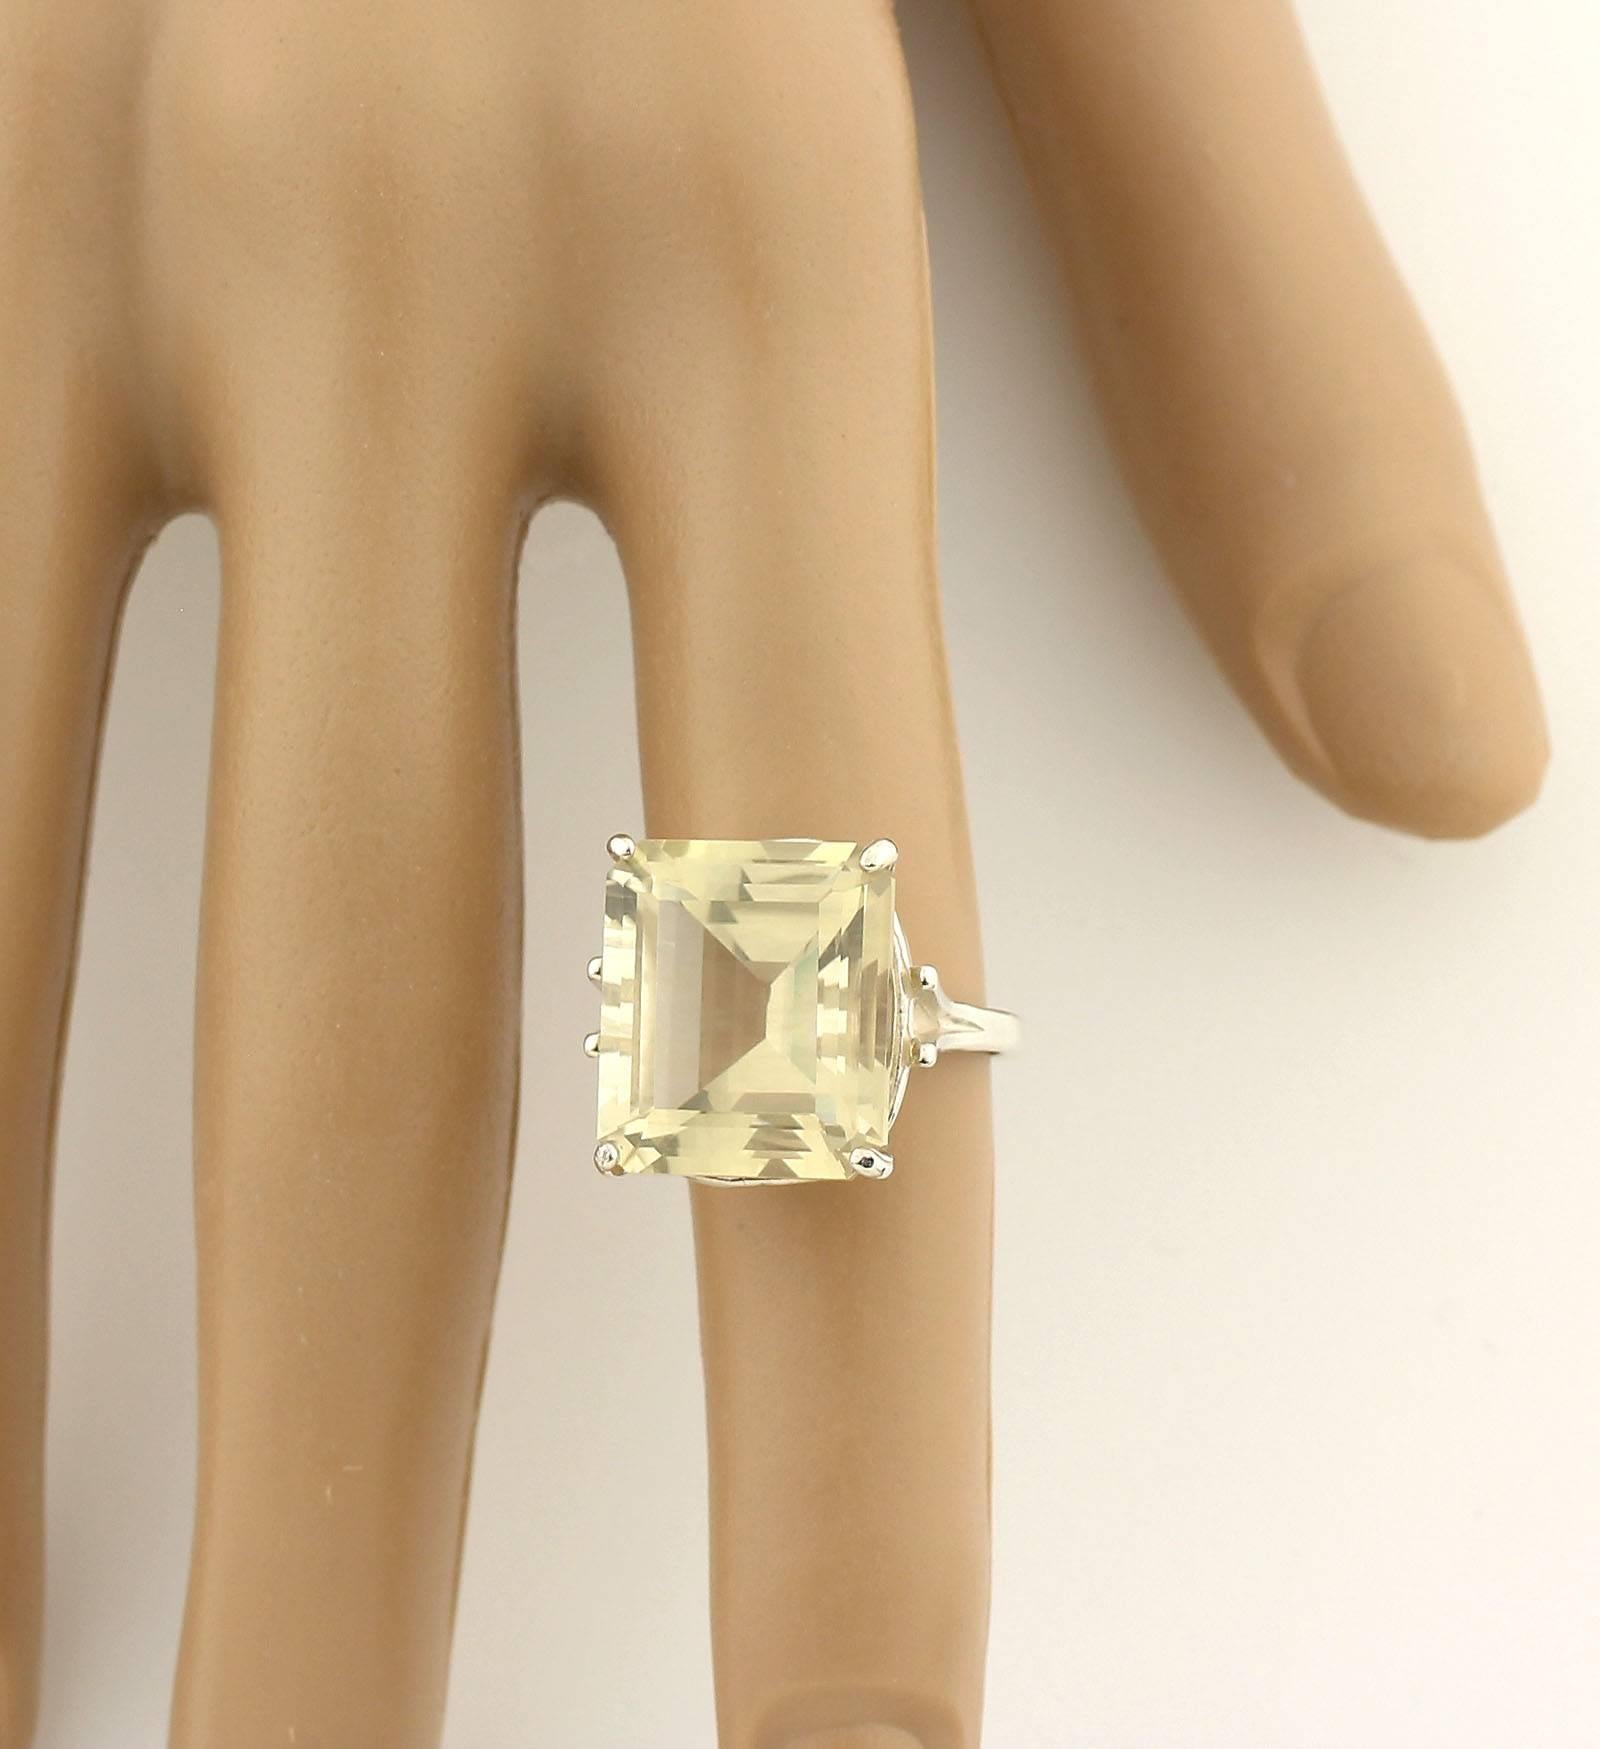 Large 16+ Carat glistening unique emerald cushion cut natural Lemon Quartz handmade ring with no visible inclusions..
Size:  14 mm x 16 mm
Ring;  Sterling Silver
Ring size:  7 sizable